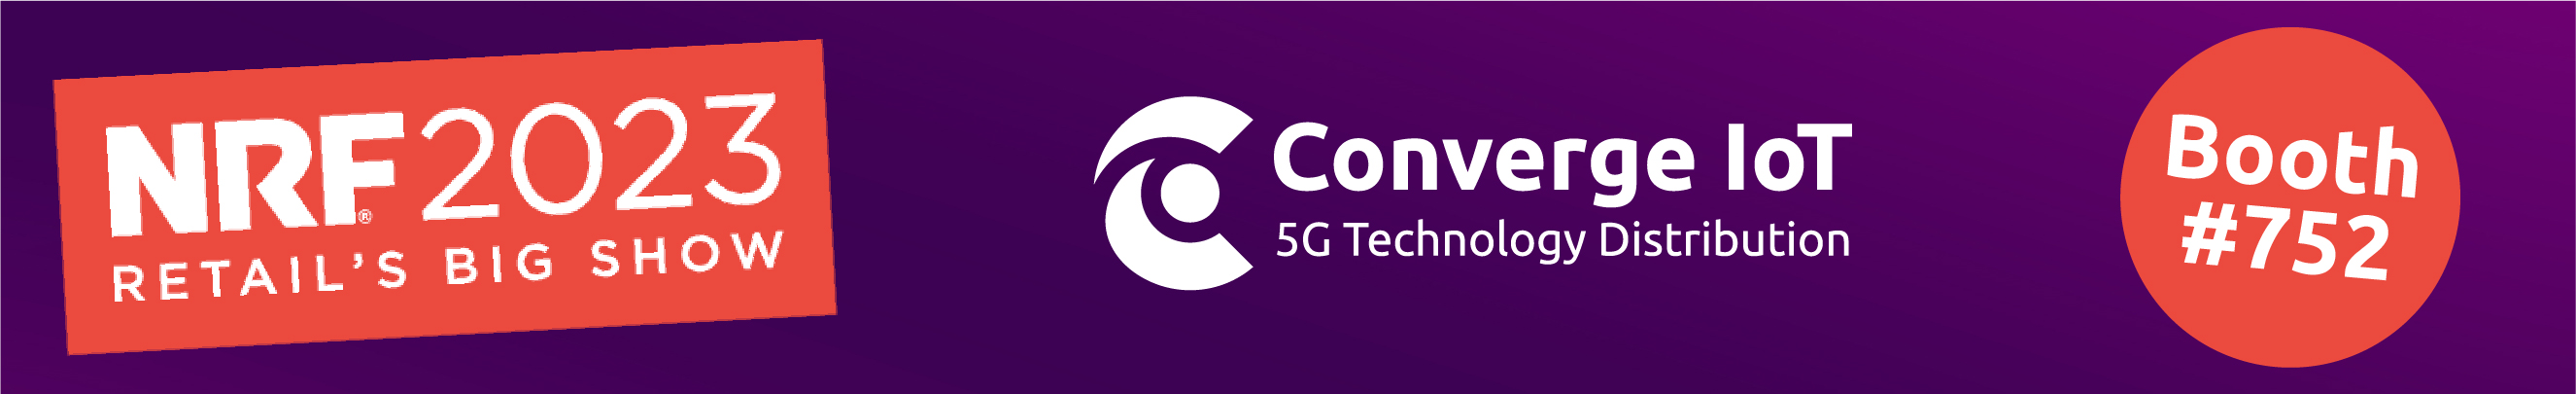 Converge IoT, Inc., Wednesday, January 11, 2023, Press release picture